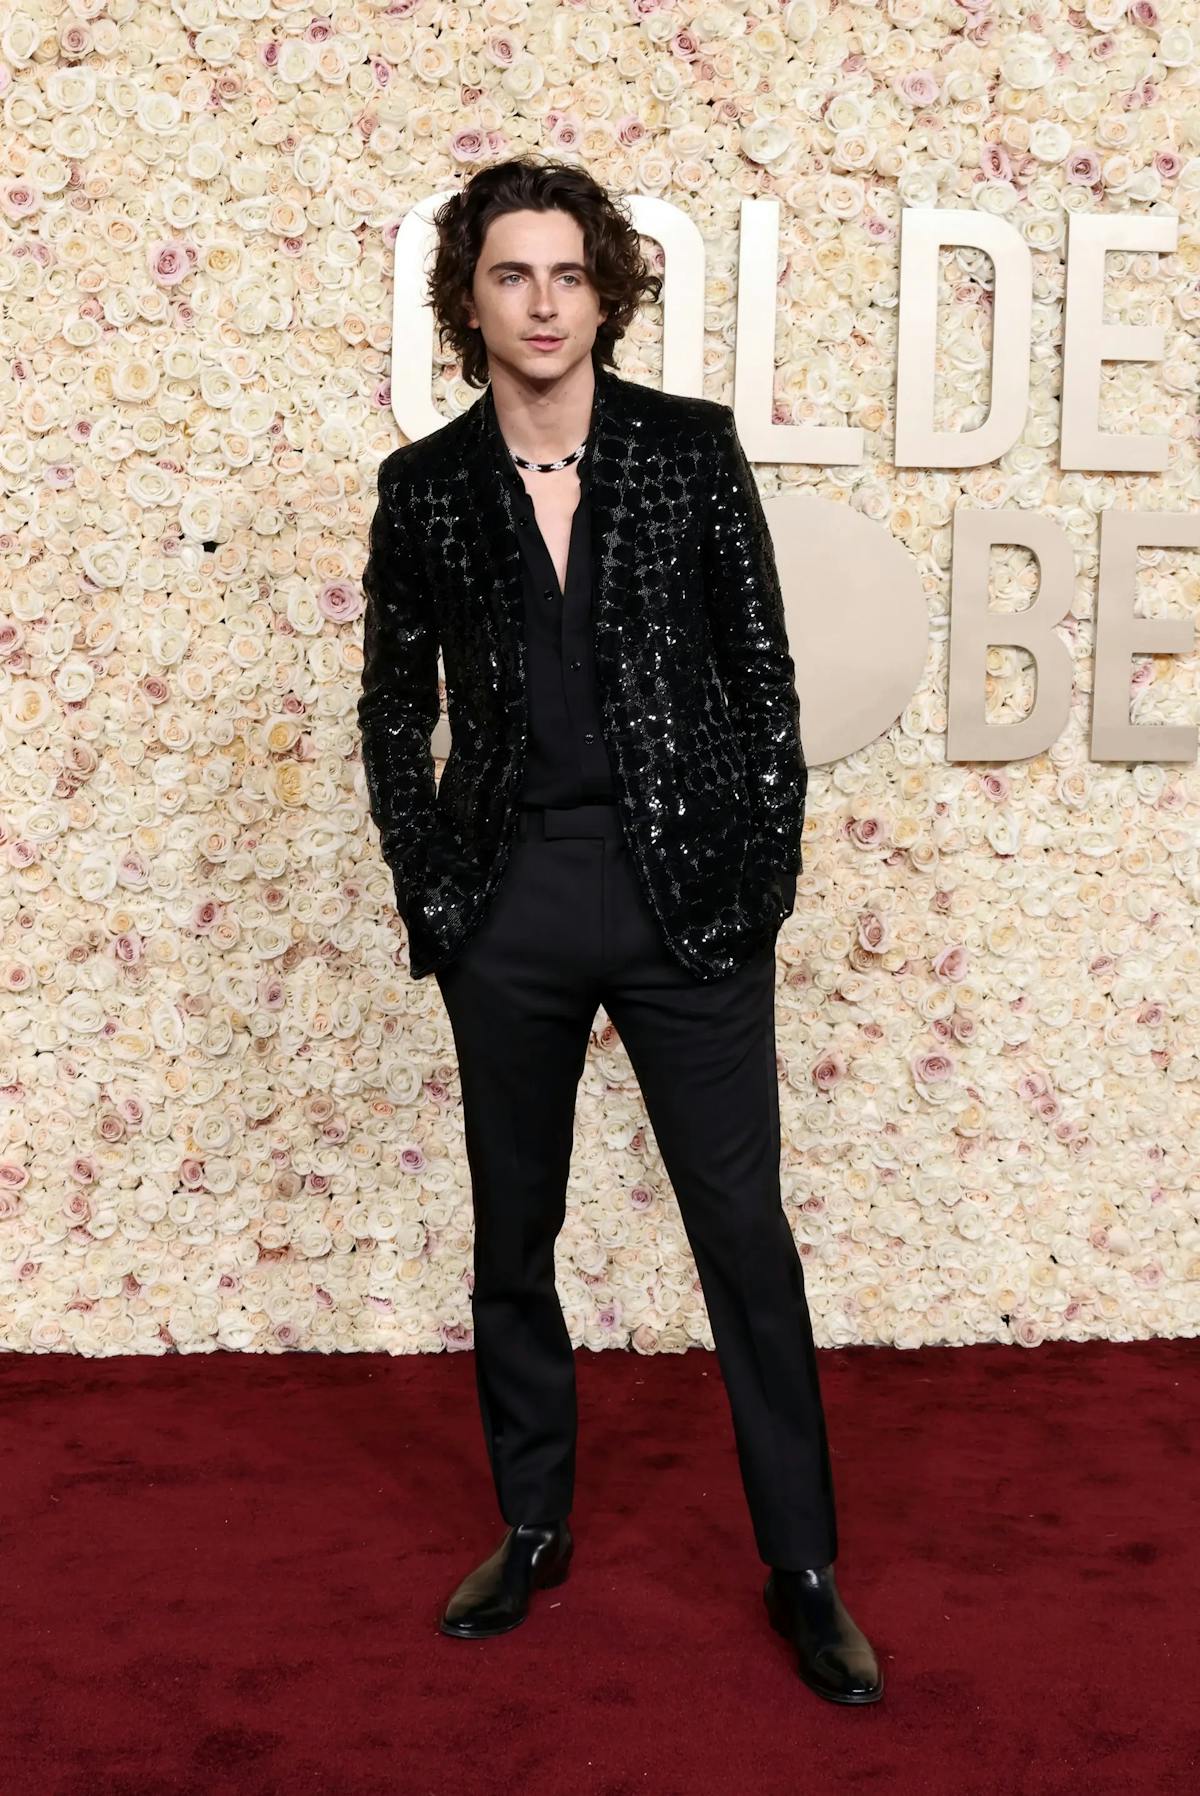 Timothée Chalamet at the 2024 Golden Globes for Wonka wearing an all black tuxedo with patterned sequin detail.